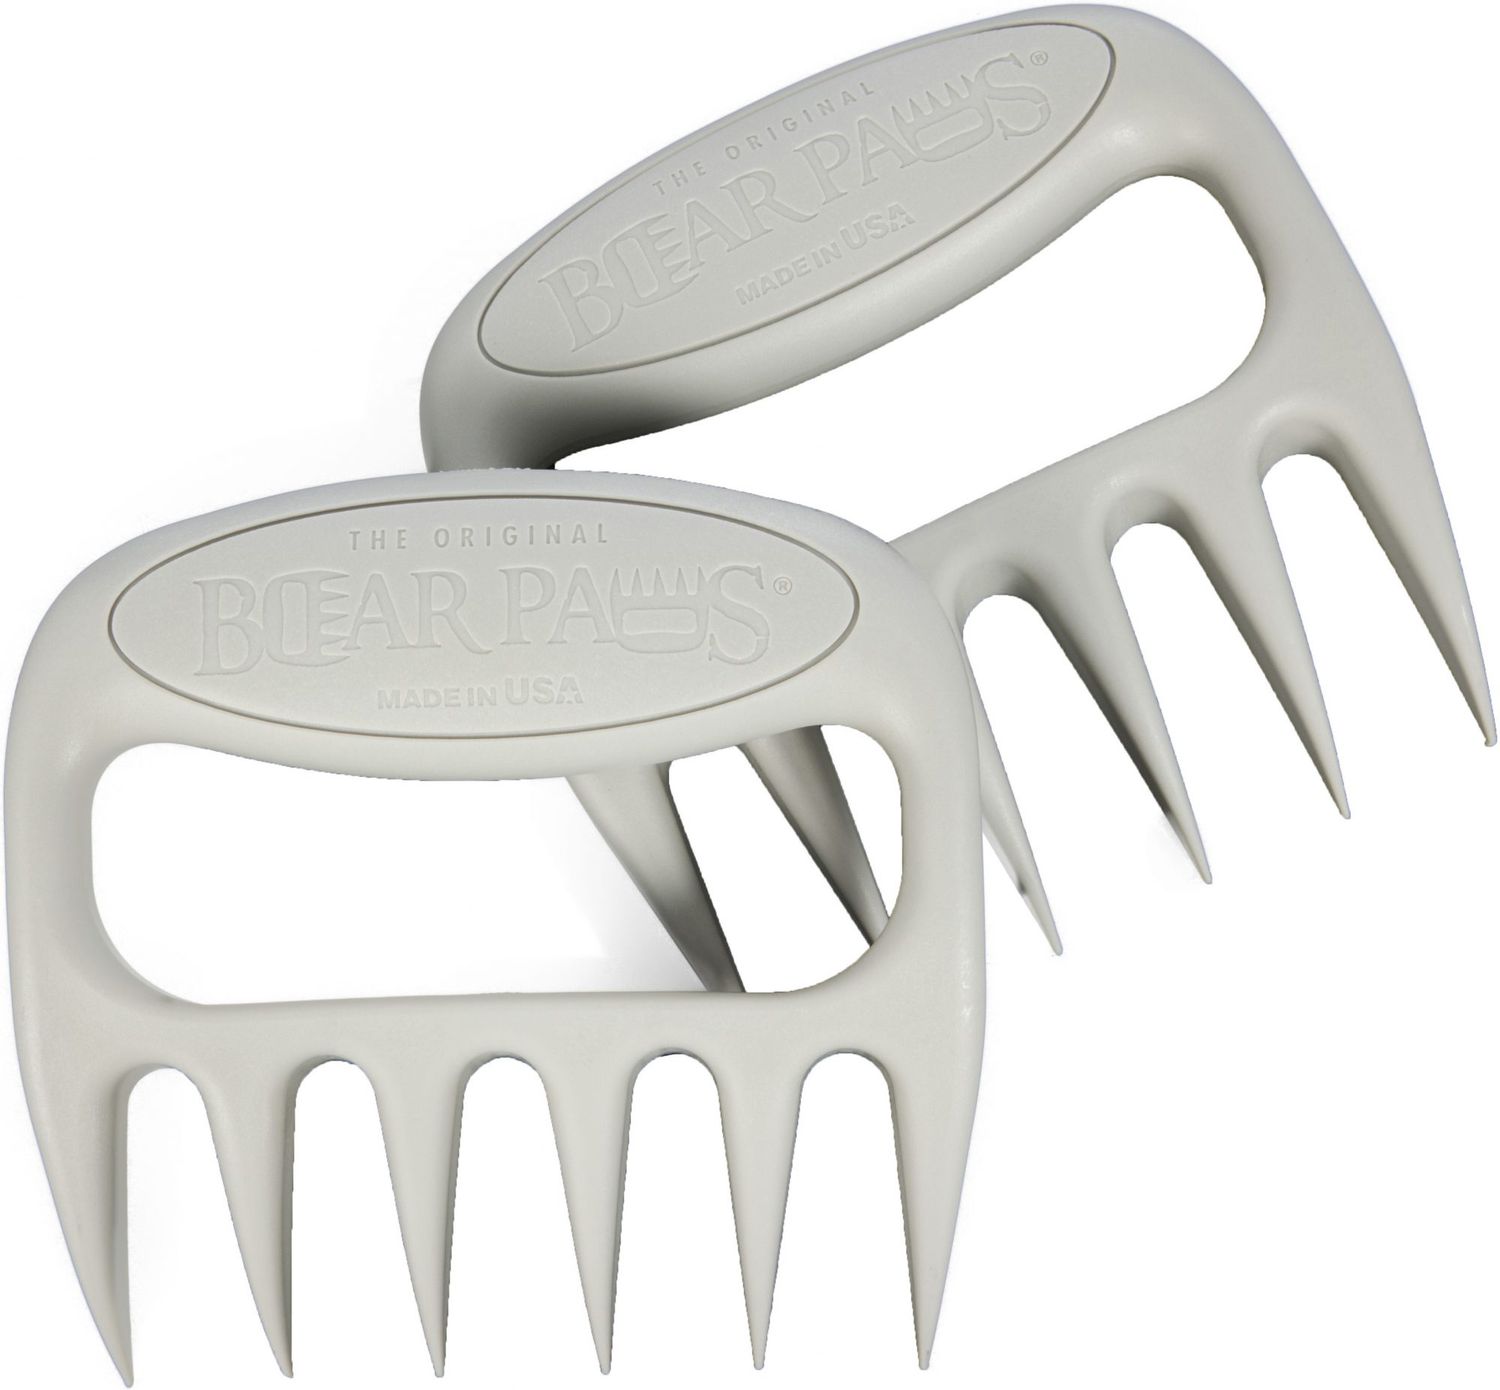 Gray Bear Paws Meat Shredder Claws on white surface